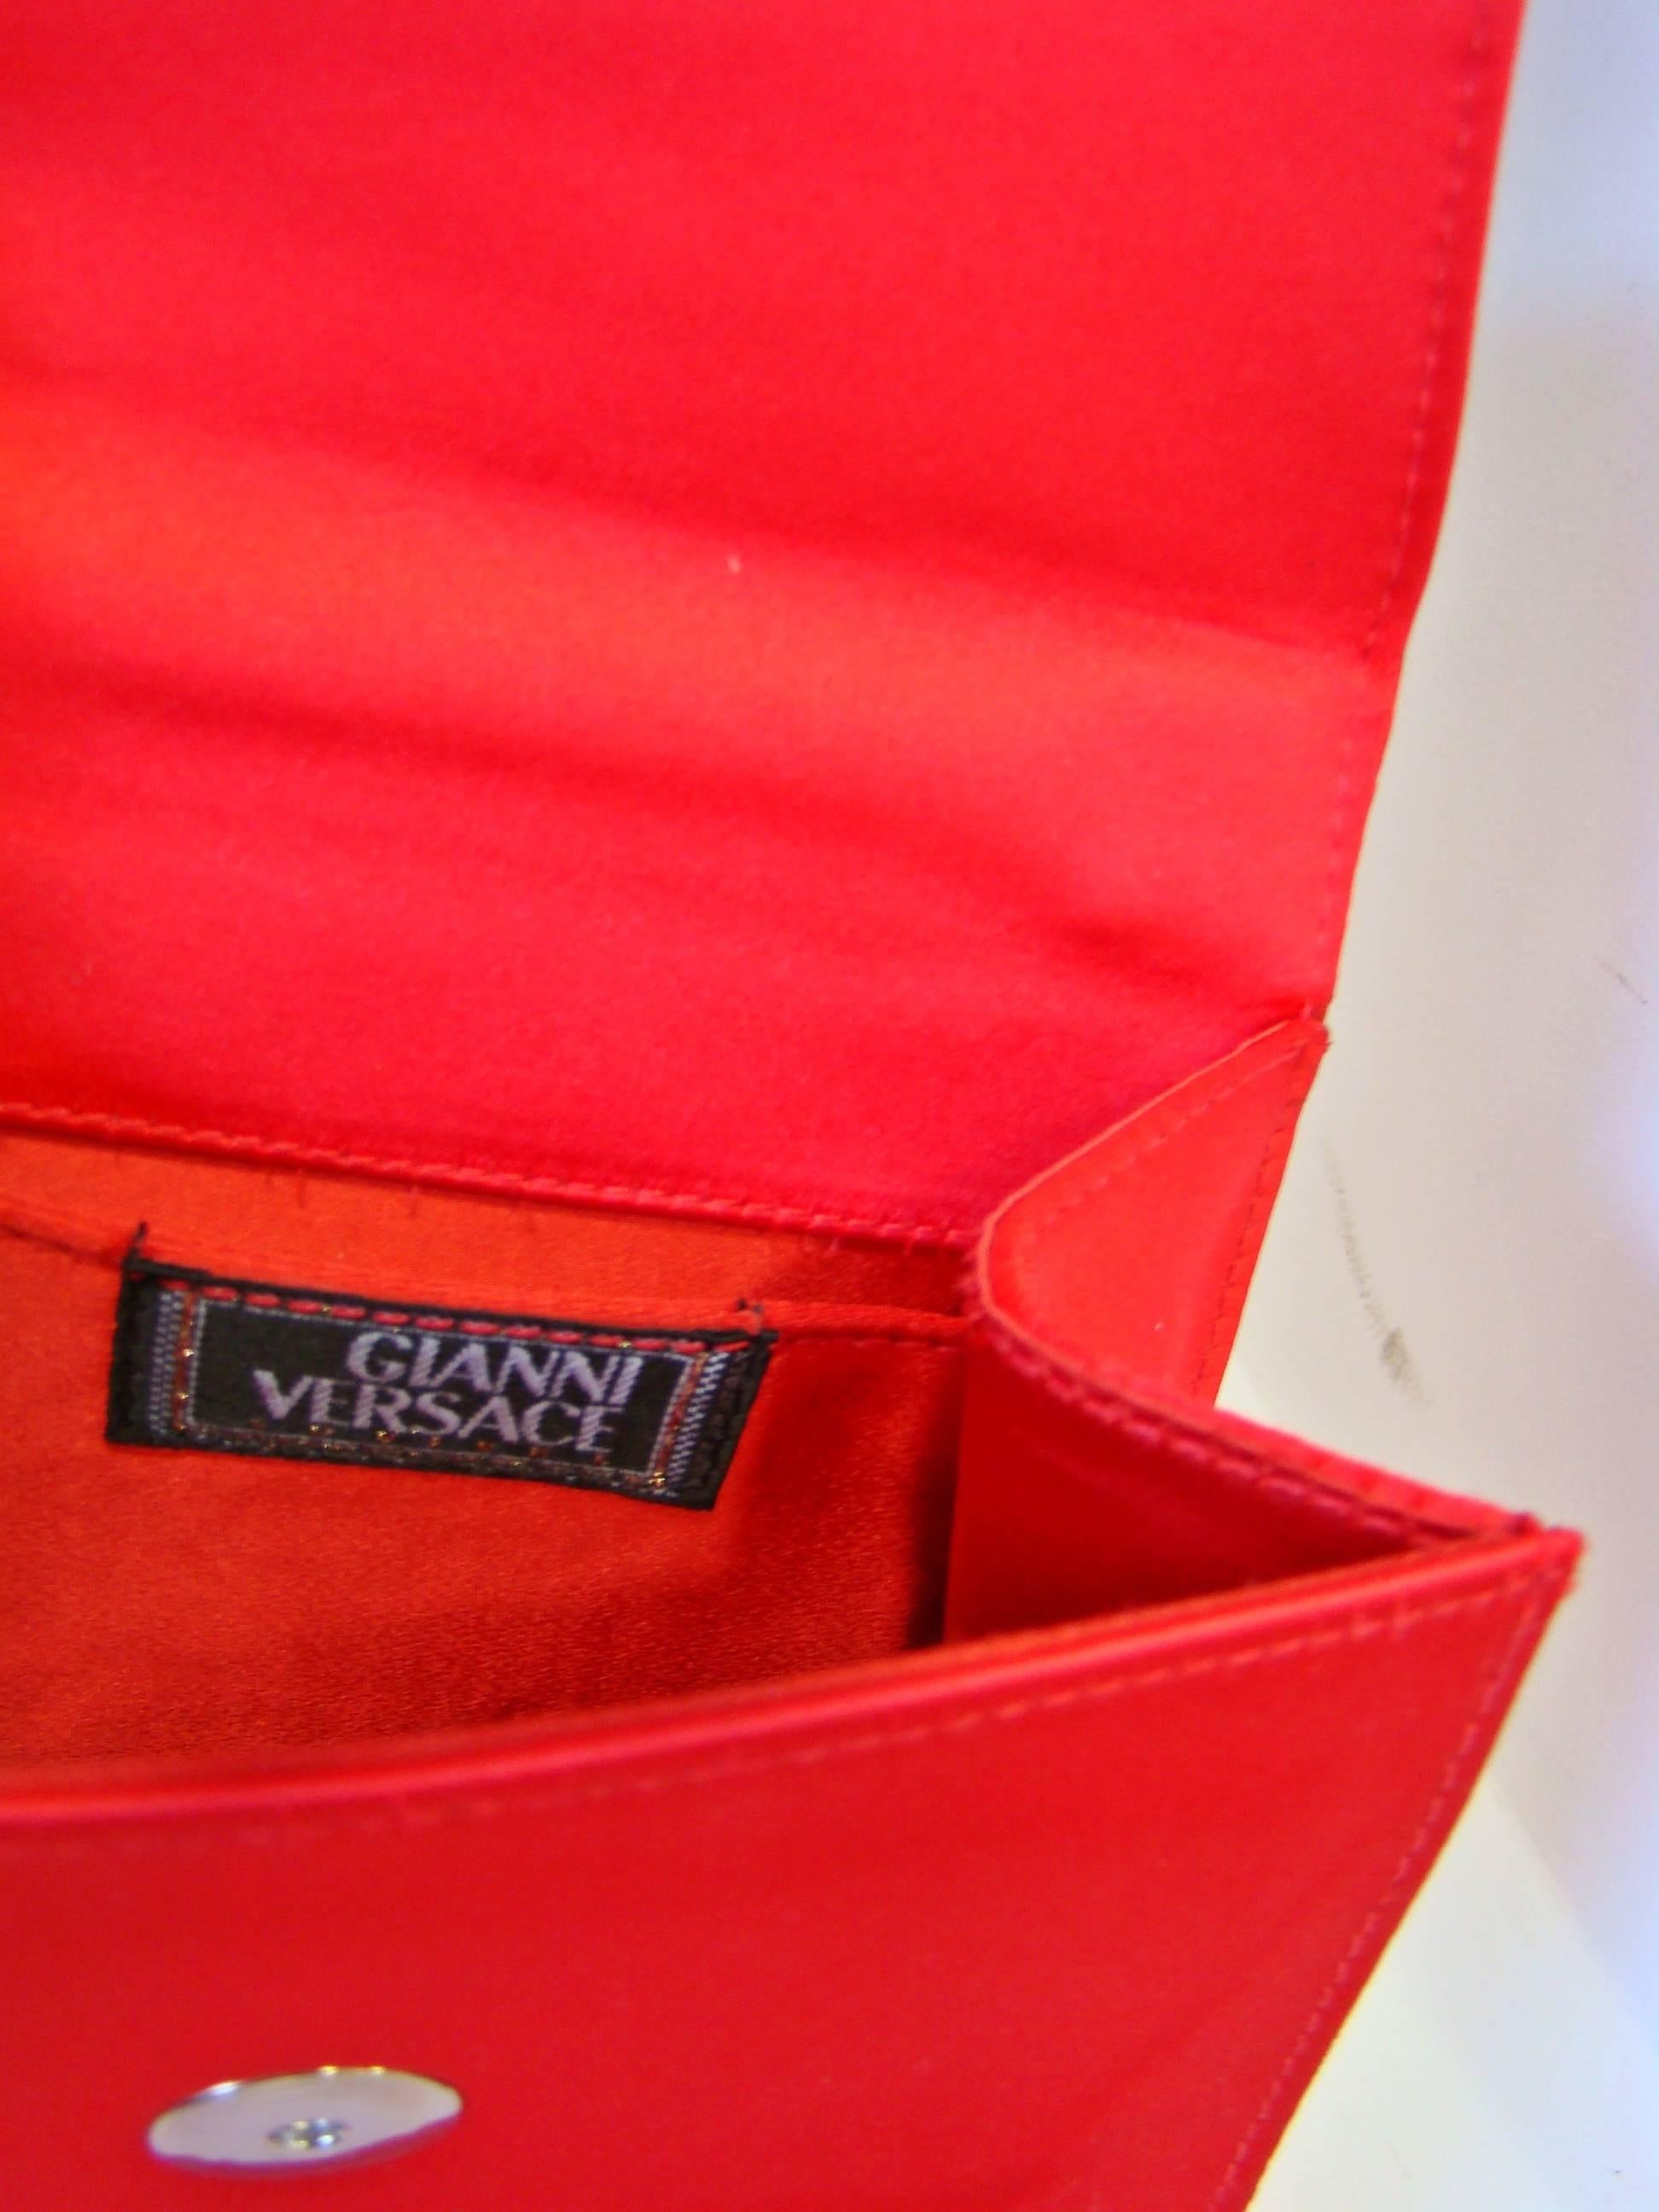 Gianni Versace Couture Red Bag 1990's For Sale 3